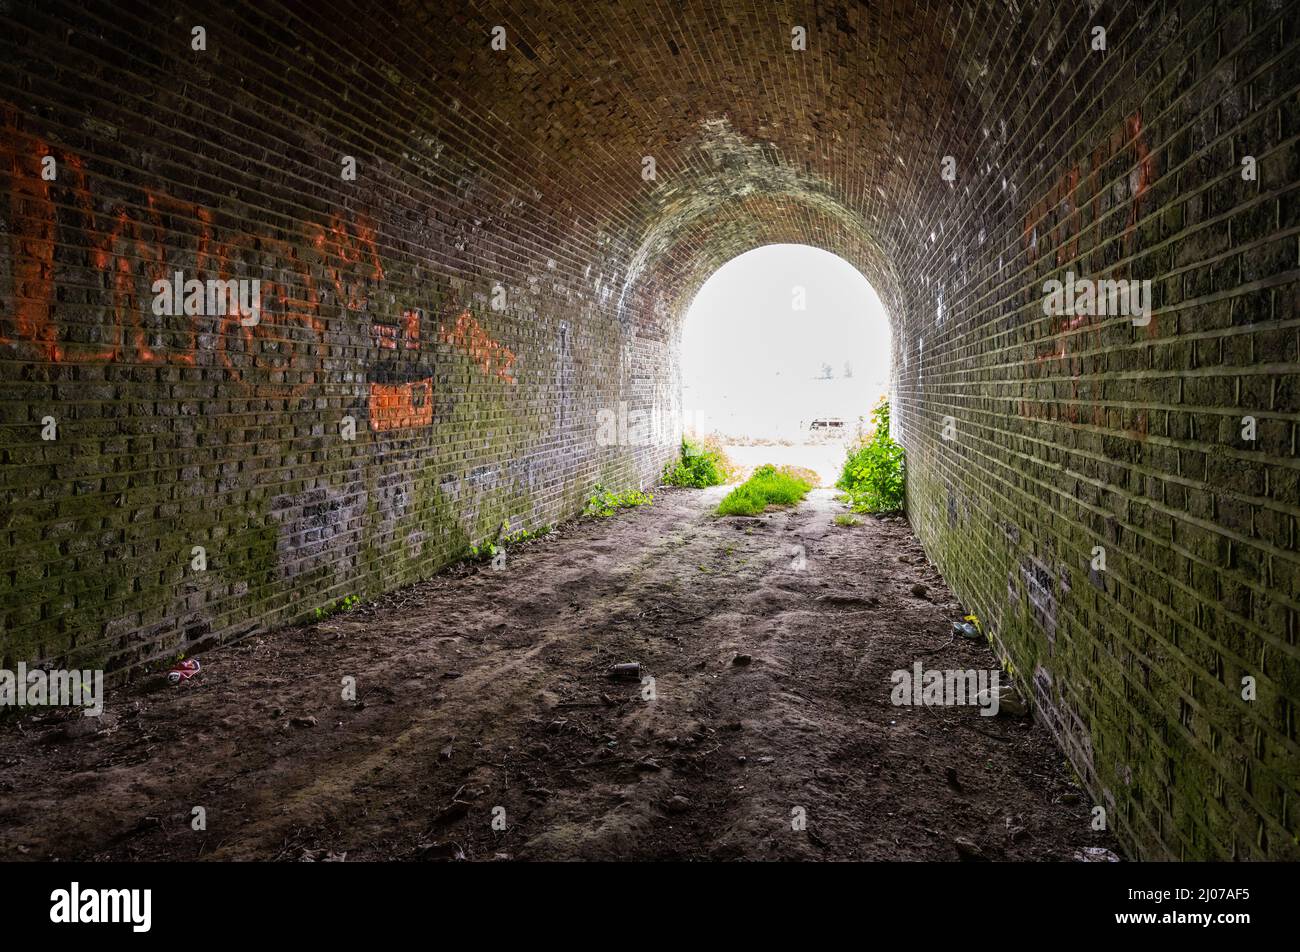 Inside a brick underline railway bridge, seemingly a tunnel, looking towards the exit using a wide angle lens in Amberley, West Sussex, England, UK. Stock Photo